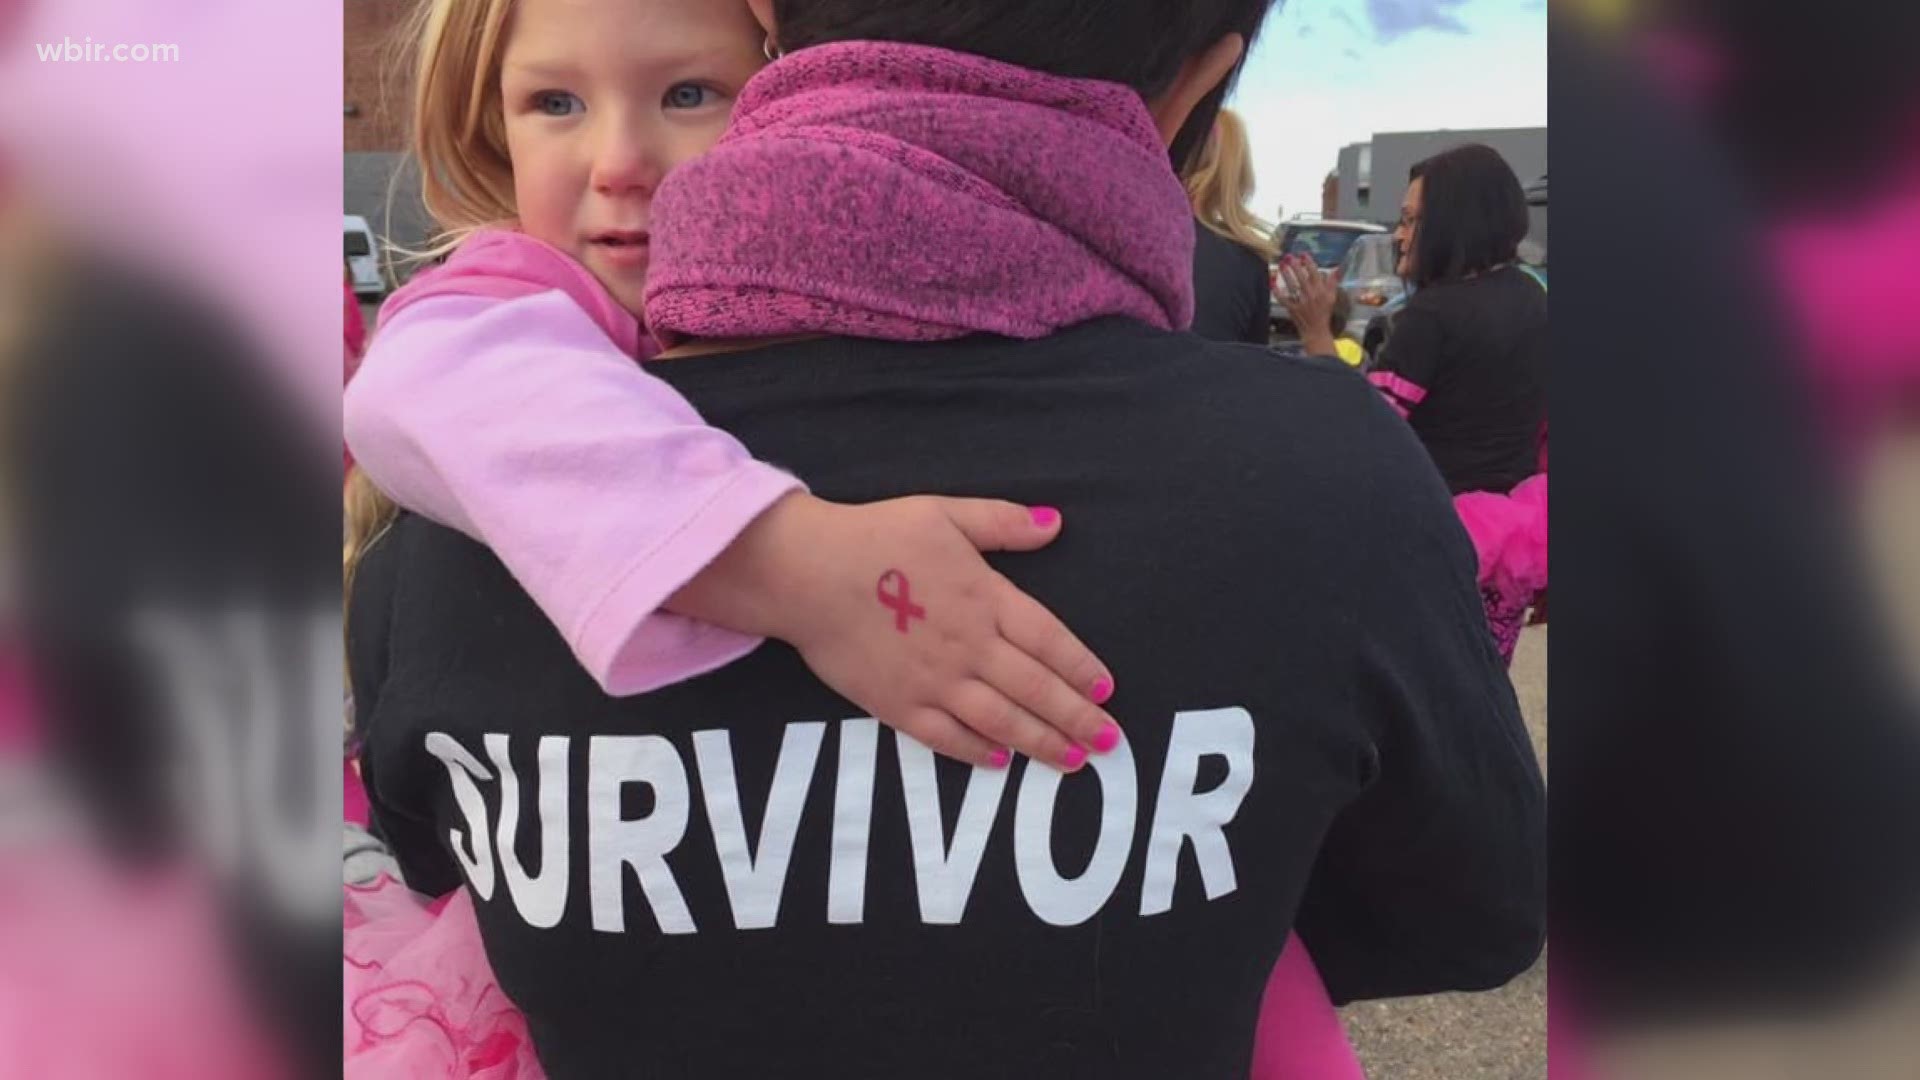 The virtual 2020 Susan G. Komen E.T. Race will include a Survivors Parade streamed live on their Facebook page on Oct. 31, komeneasttennessee.org. Oct. 26, 2020-4pm.